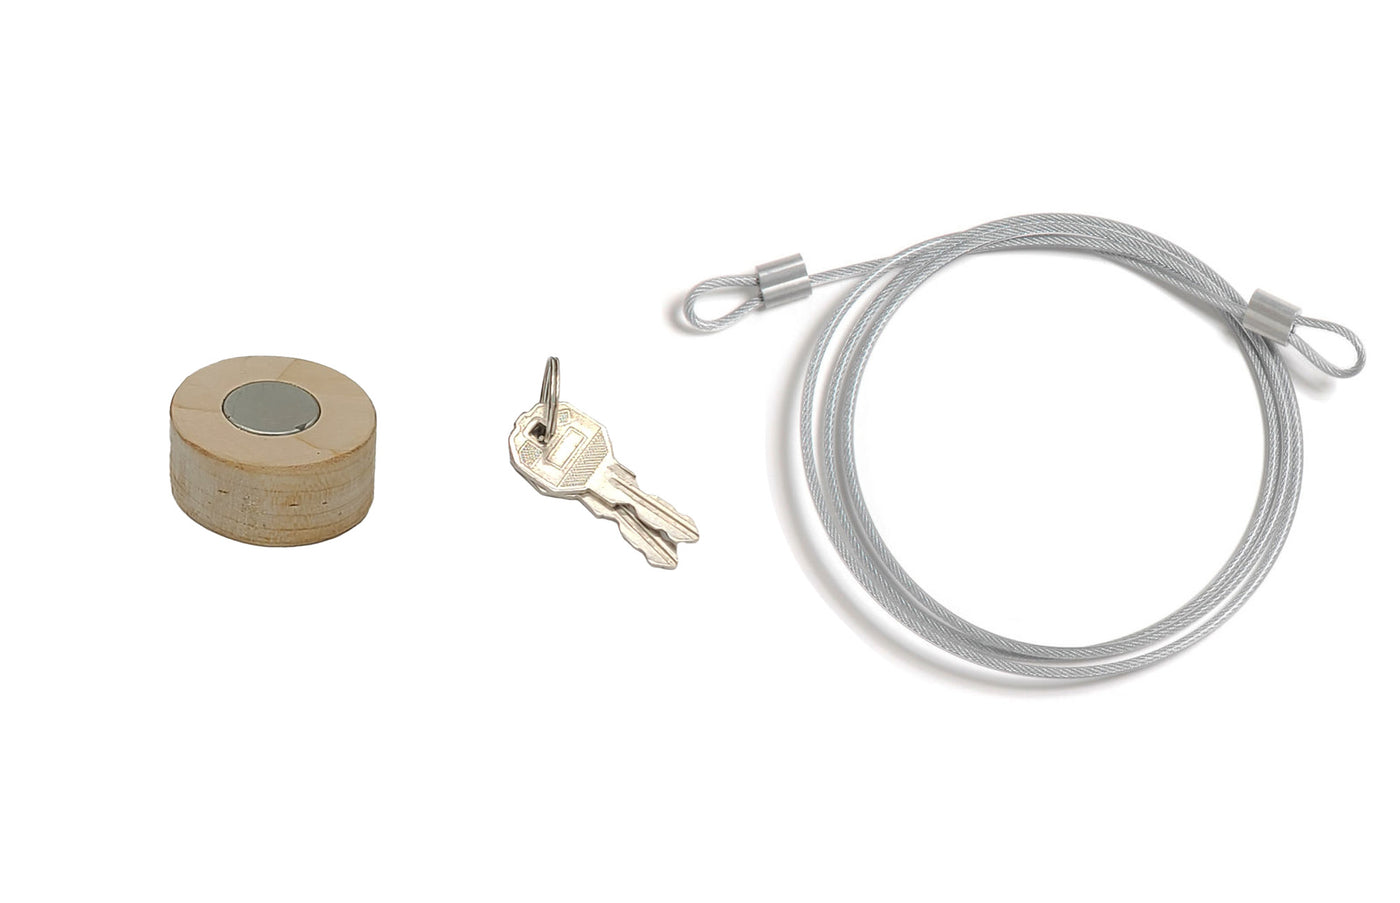 BoscoBox Sample Key Magnet and Tether Cable